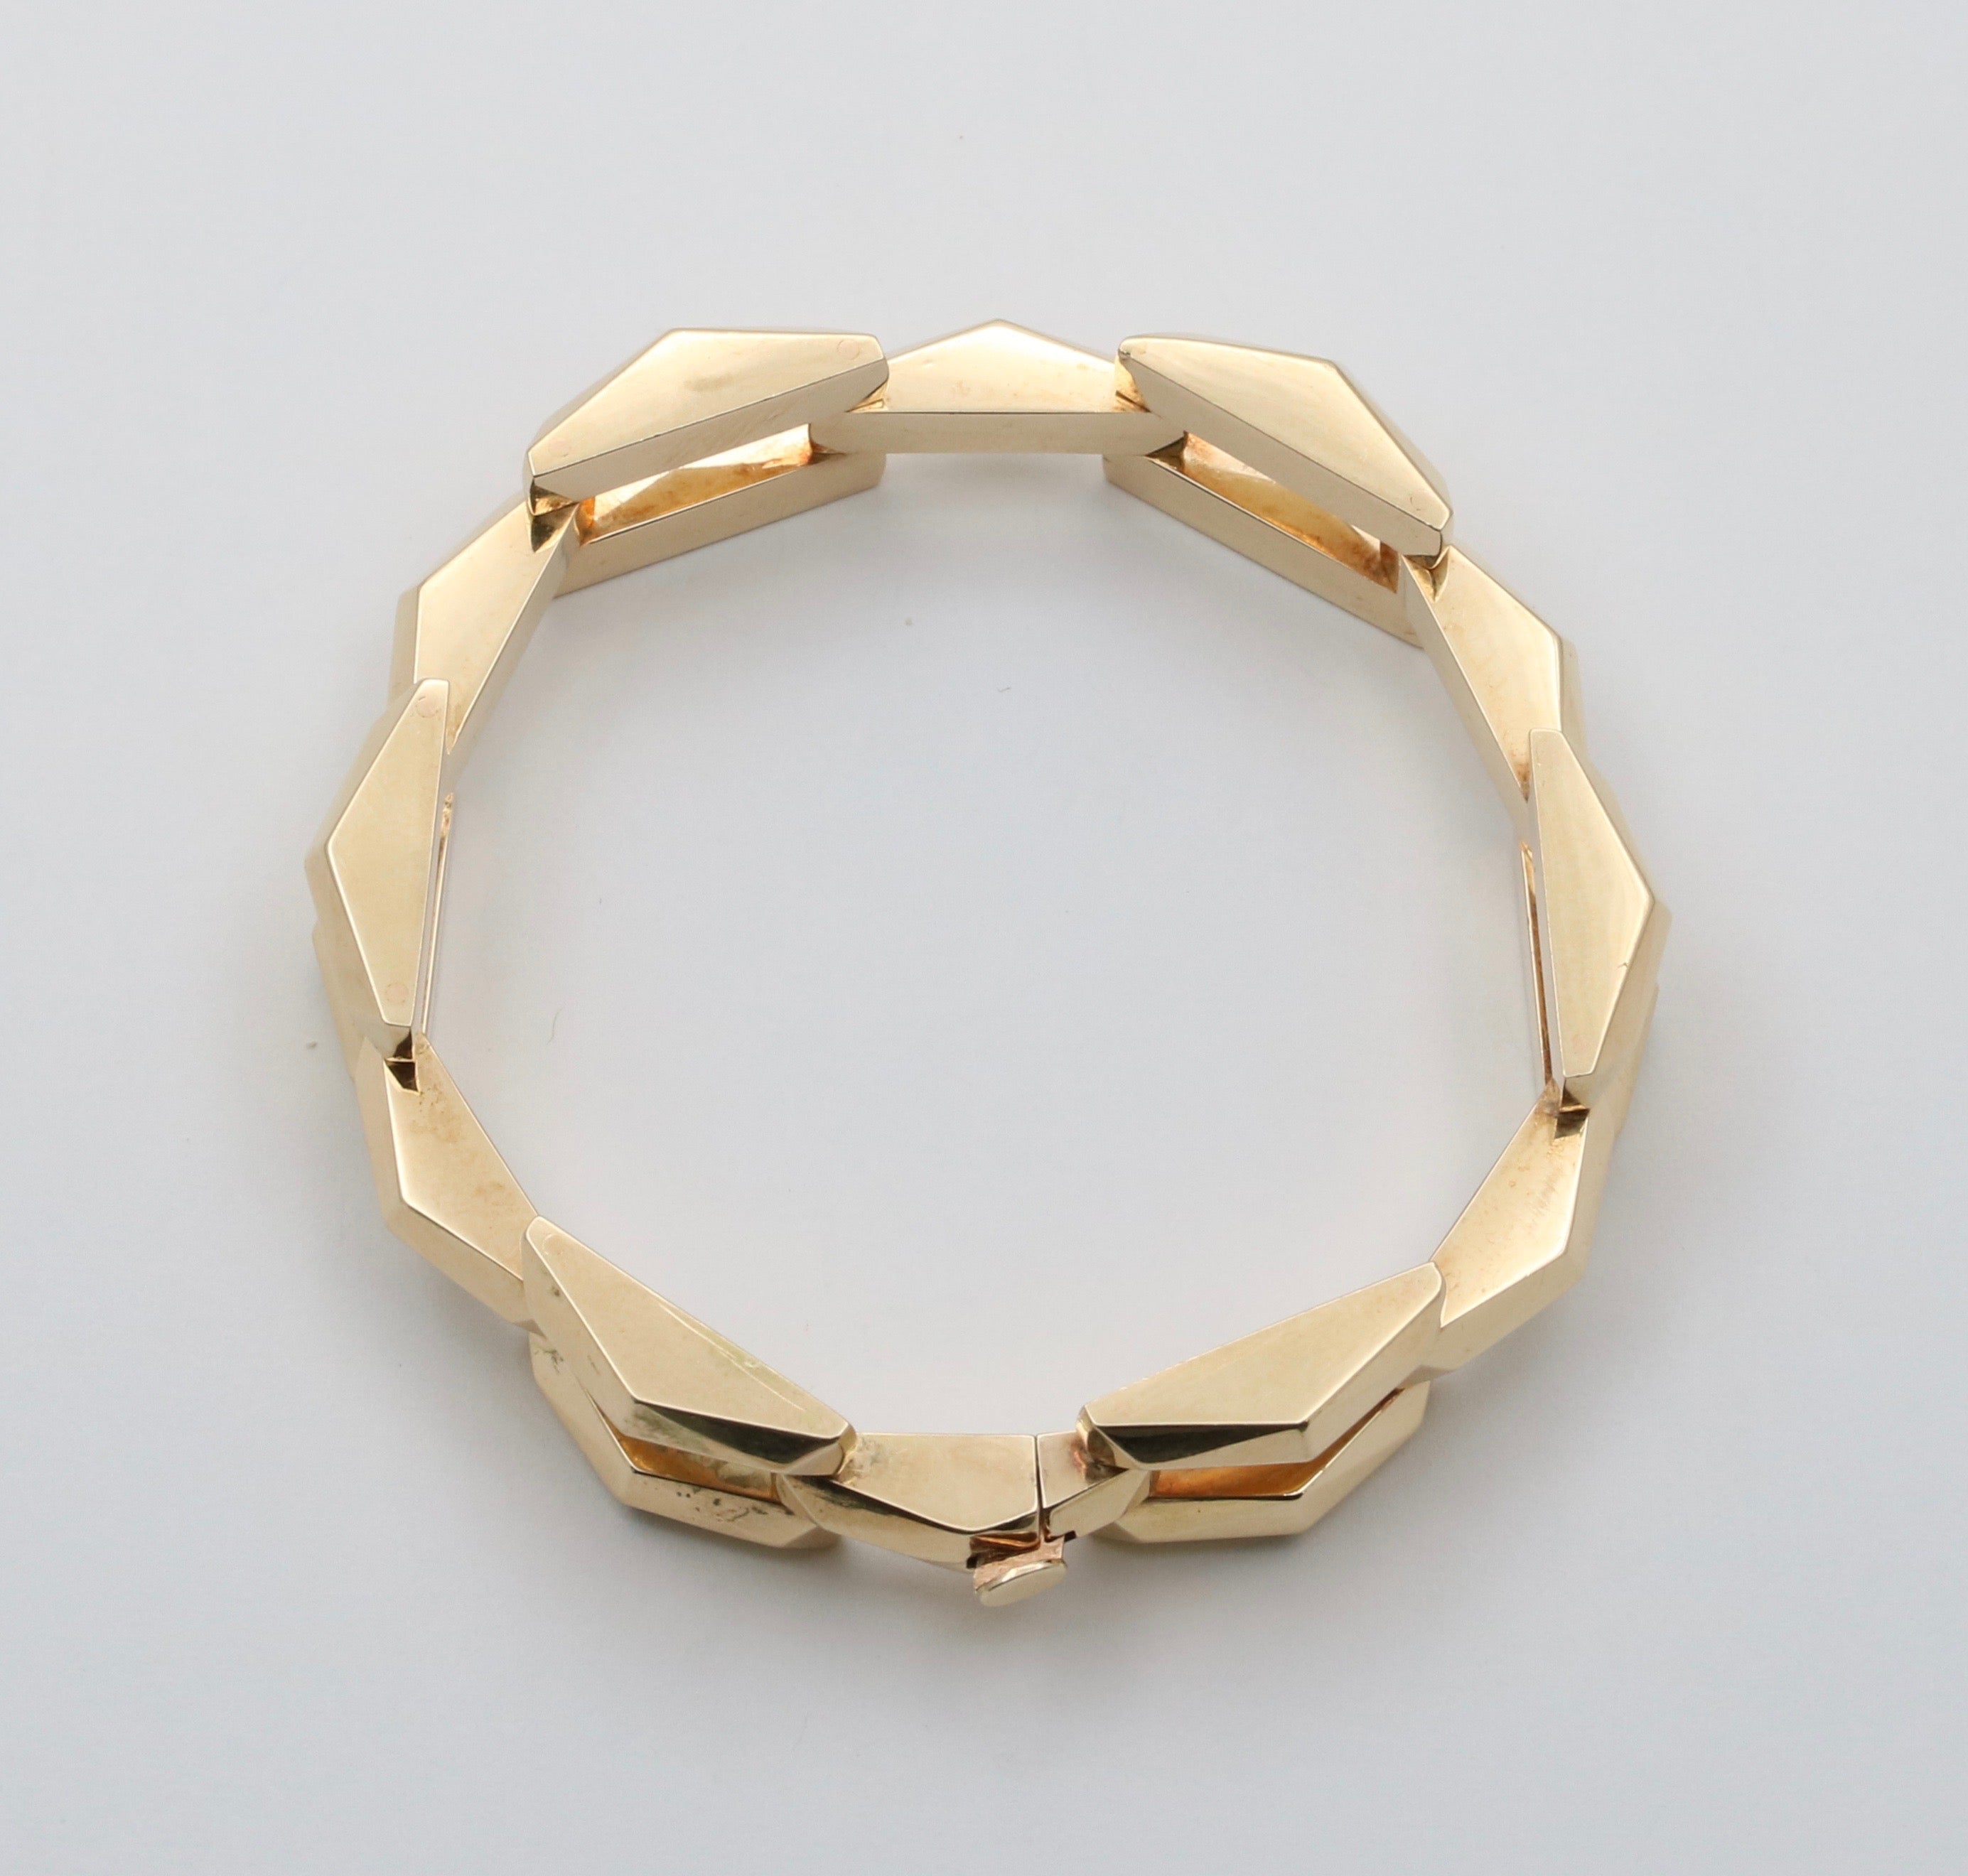 Here's a List of Top 5 Gold Bracelets to Flaunt Your Work Look! - Melorra